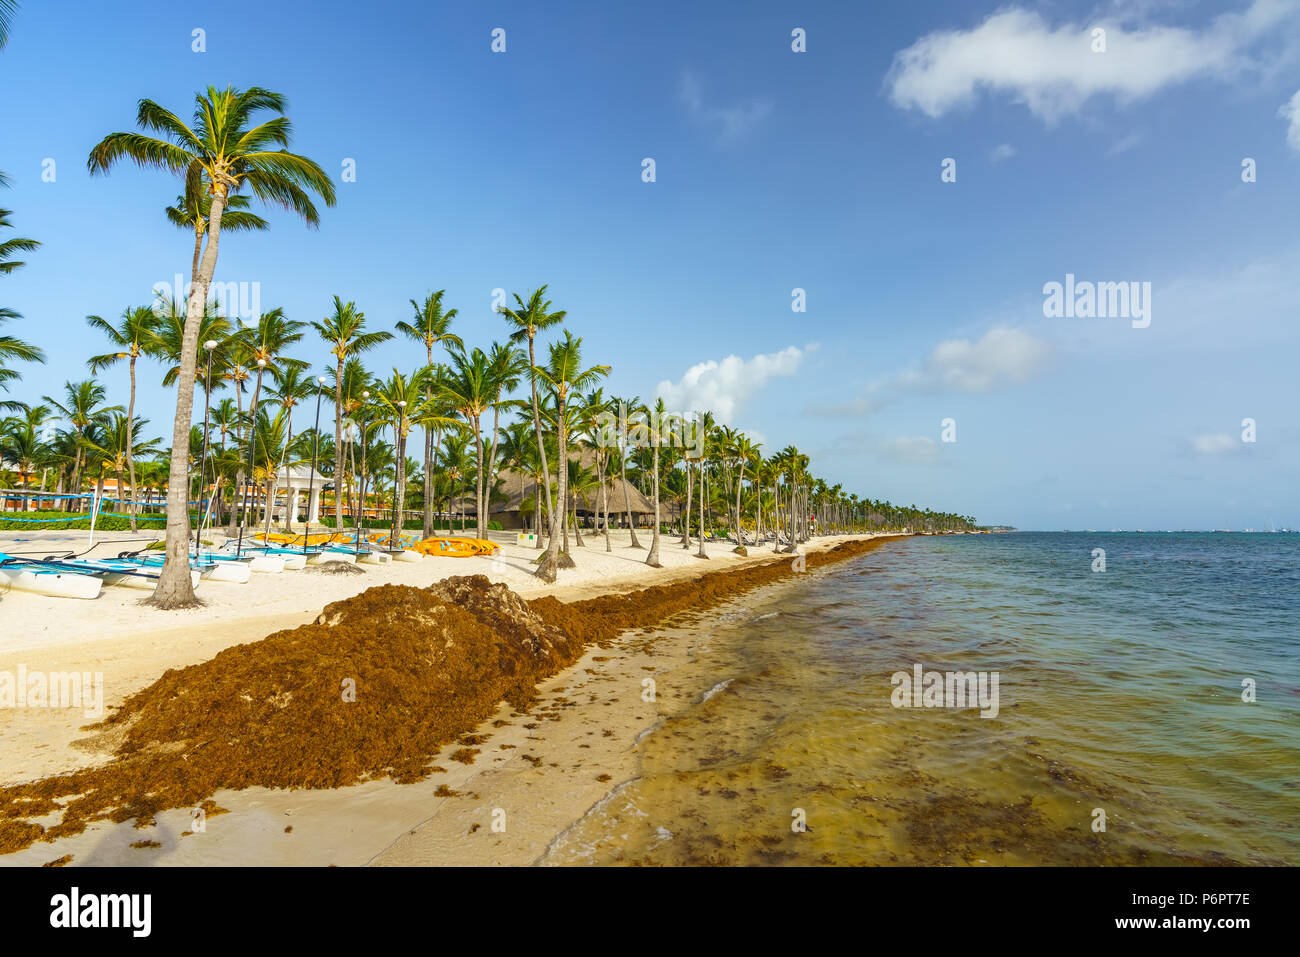 Punta Cana, Dominican Republic - June 25, 2018: sargassum seaweeds on the beaytiful ocean beach in Bavaro, Punta Cana, the result of global warming climate change. Stock Photo